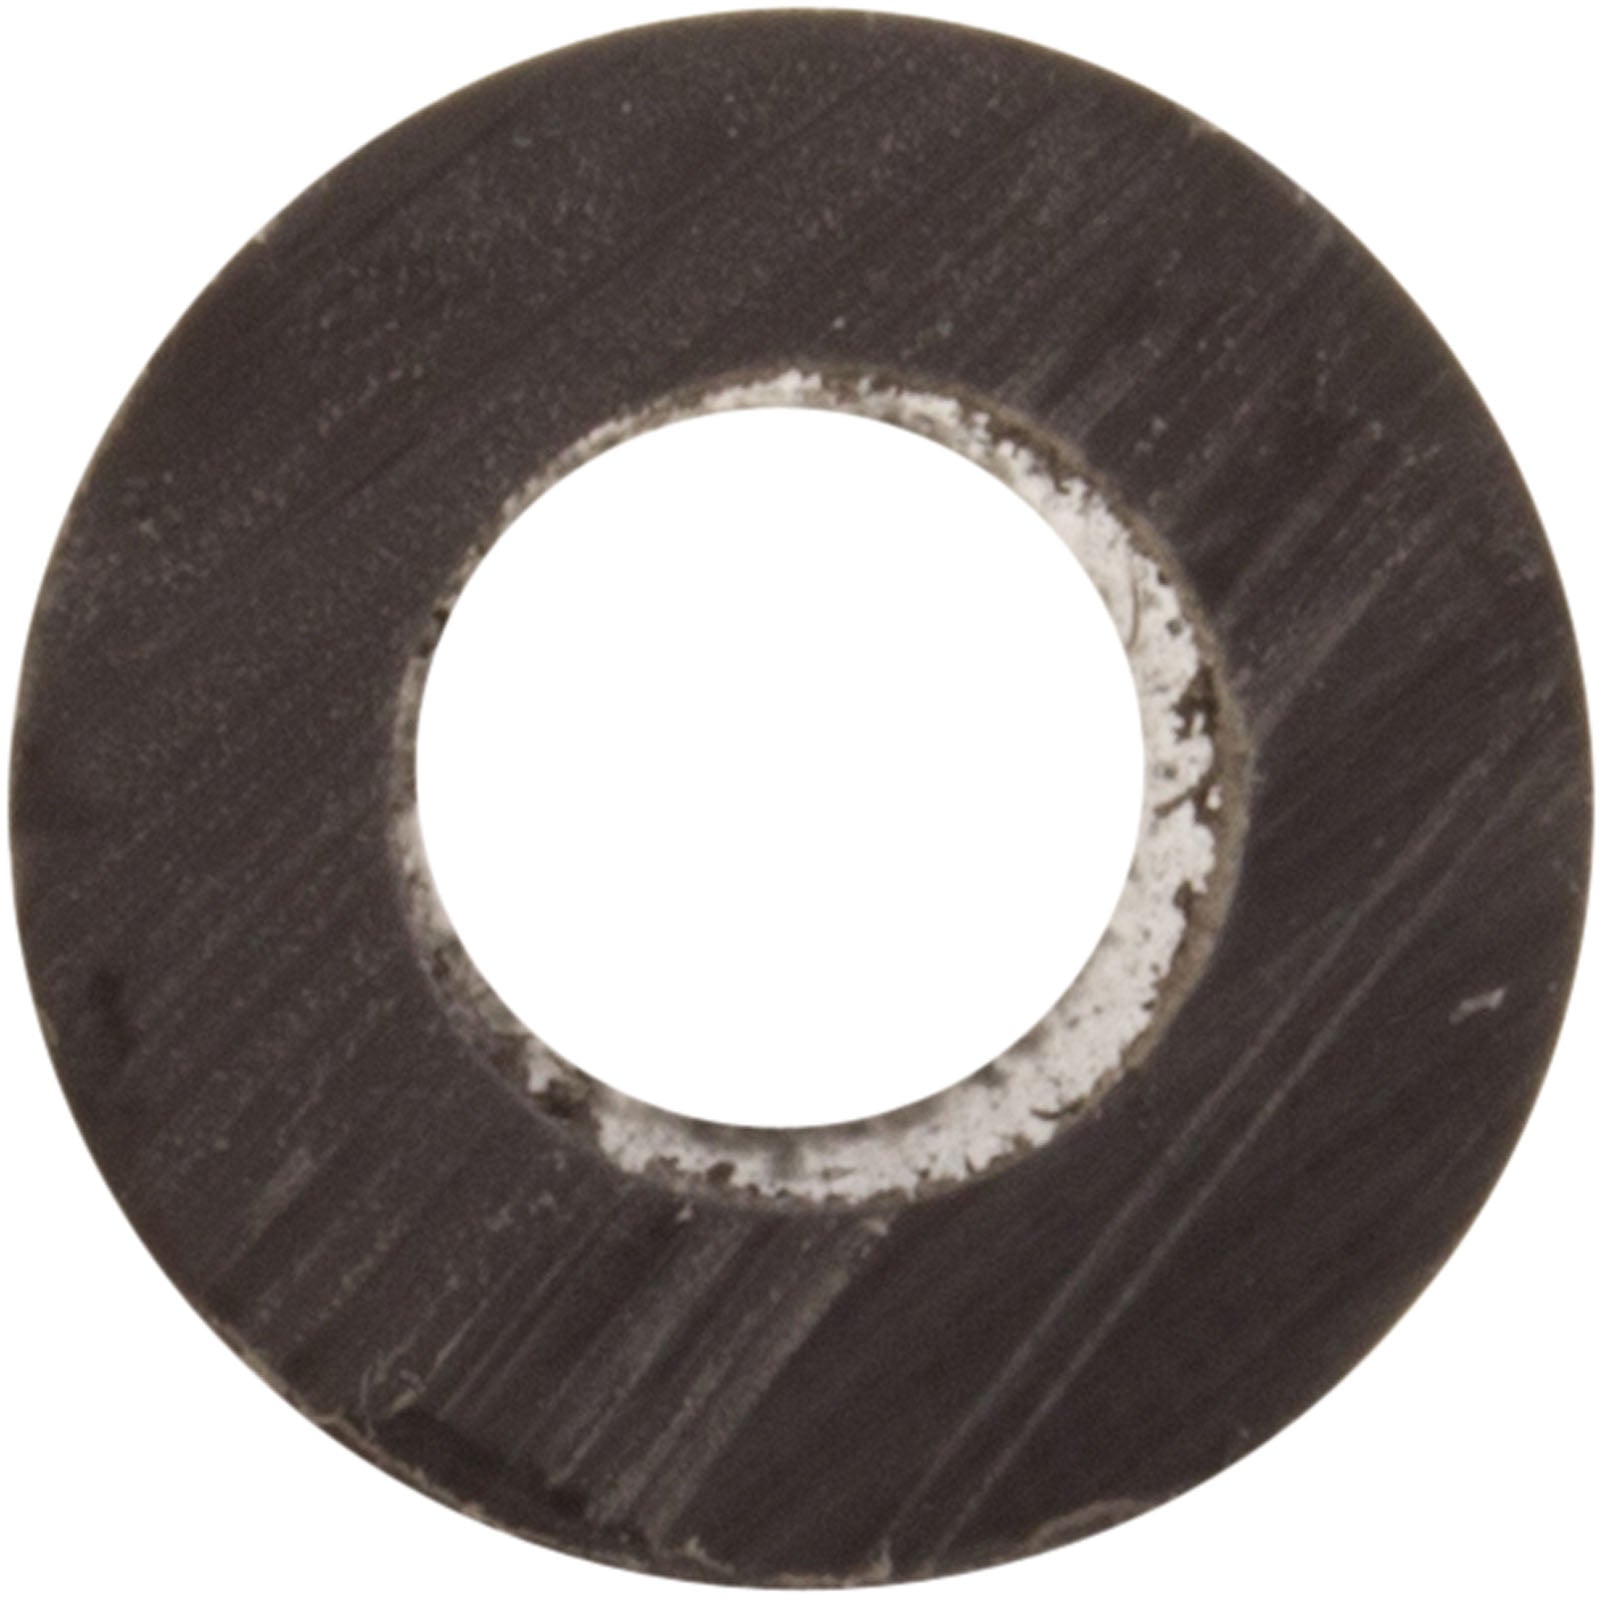 Spacer, 1-15/32", Carvin 31-1694-02-R